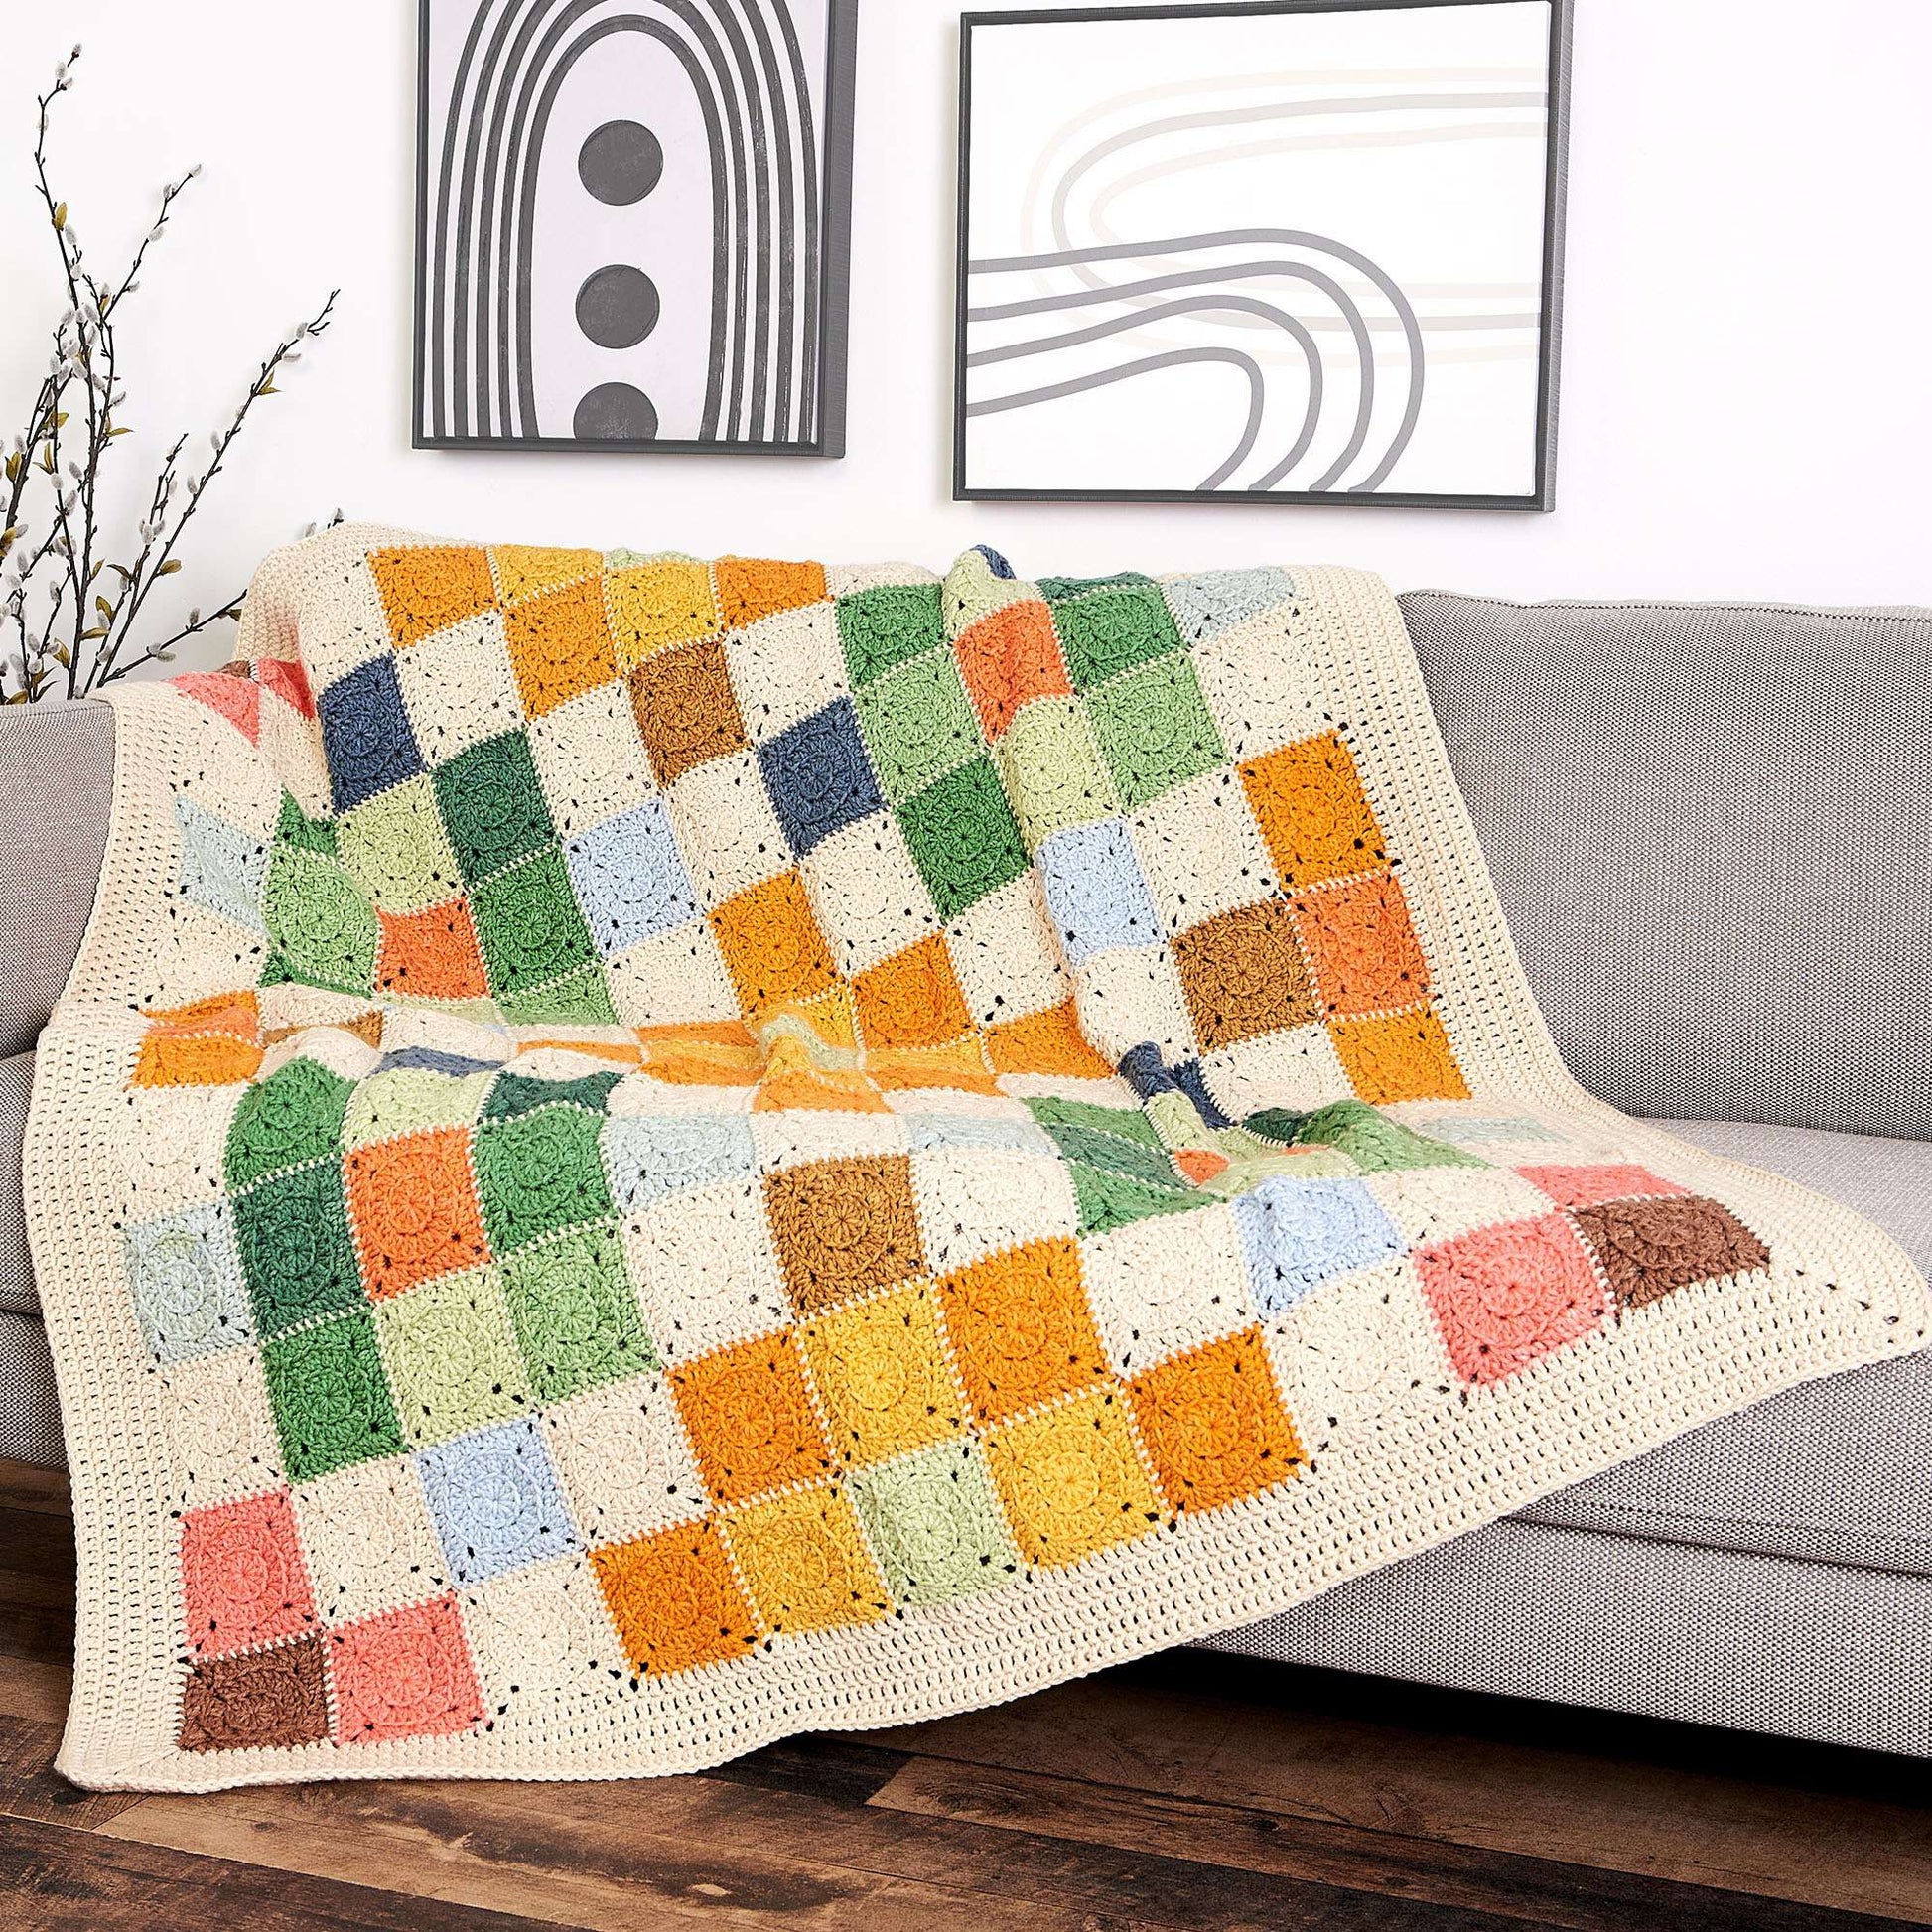 Free Caron Crochet Country Quilt Blanket Pattern